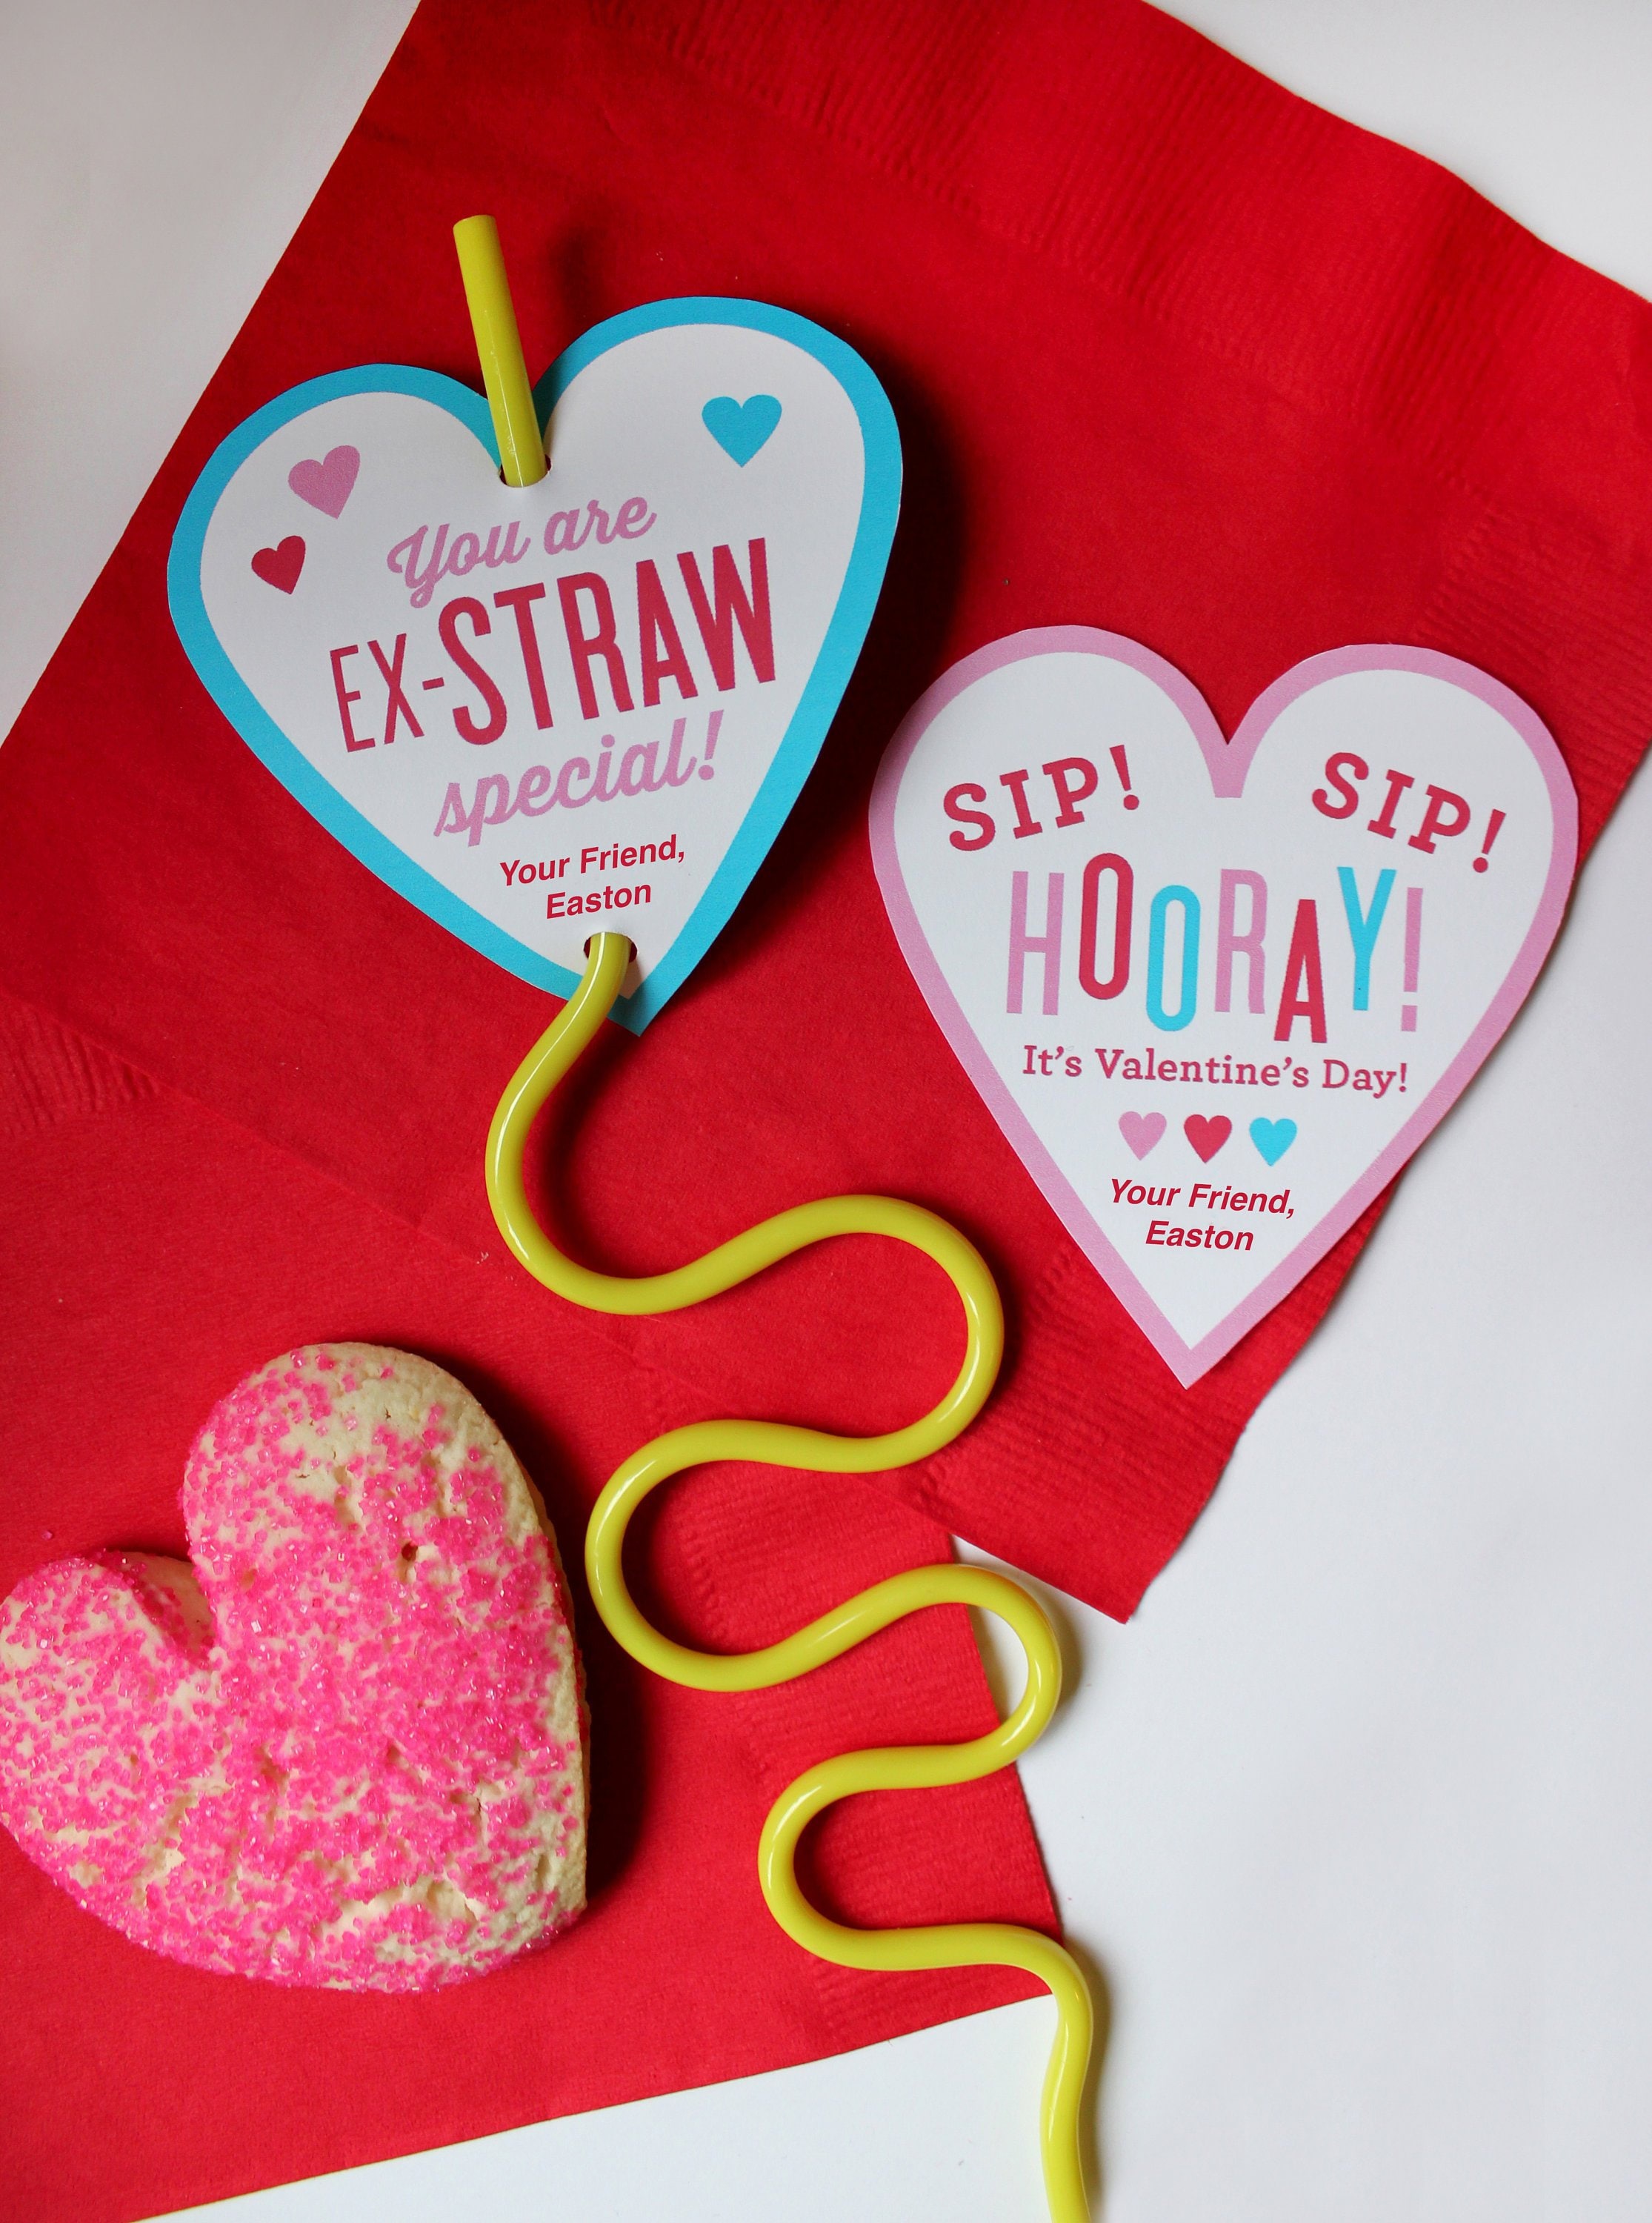  Valentines Day Gifts for Kids - Valentines Day Cards for kids -  Set of 32 Crazy Straws Bulk - Valentine Exchange Cards for Girls Boys  Toddlers School Class Classroom Party Favors 